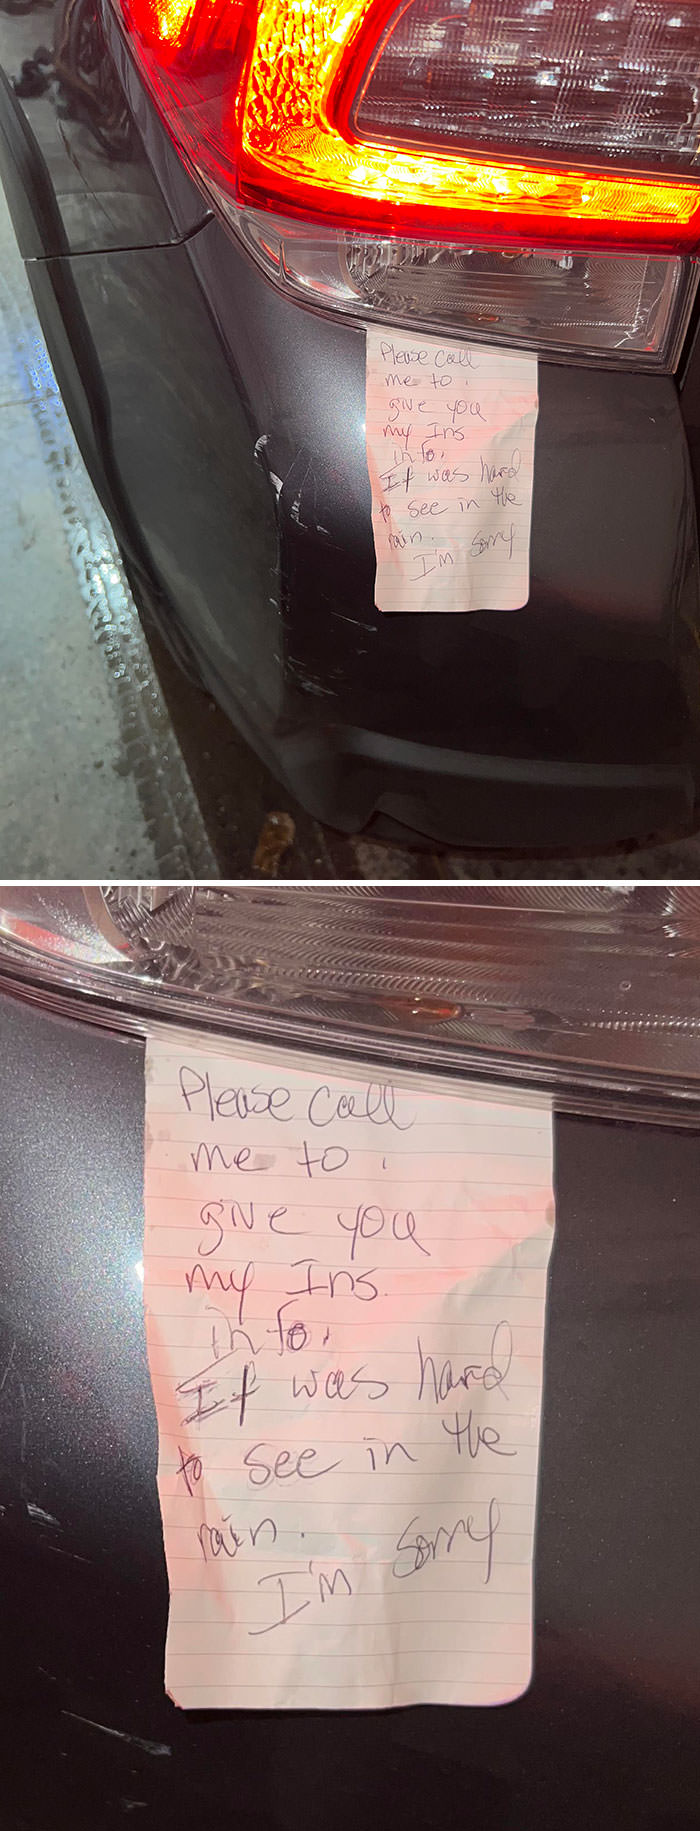 Someone hit my car and left a note with no phone number.